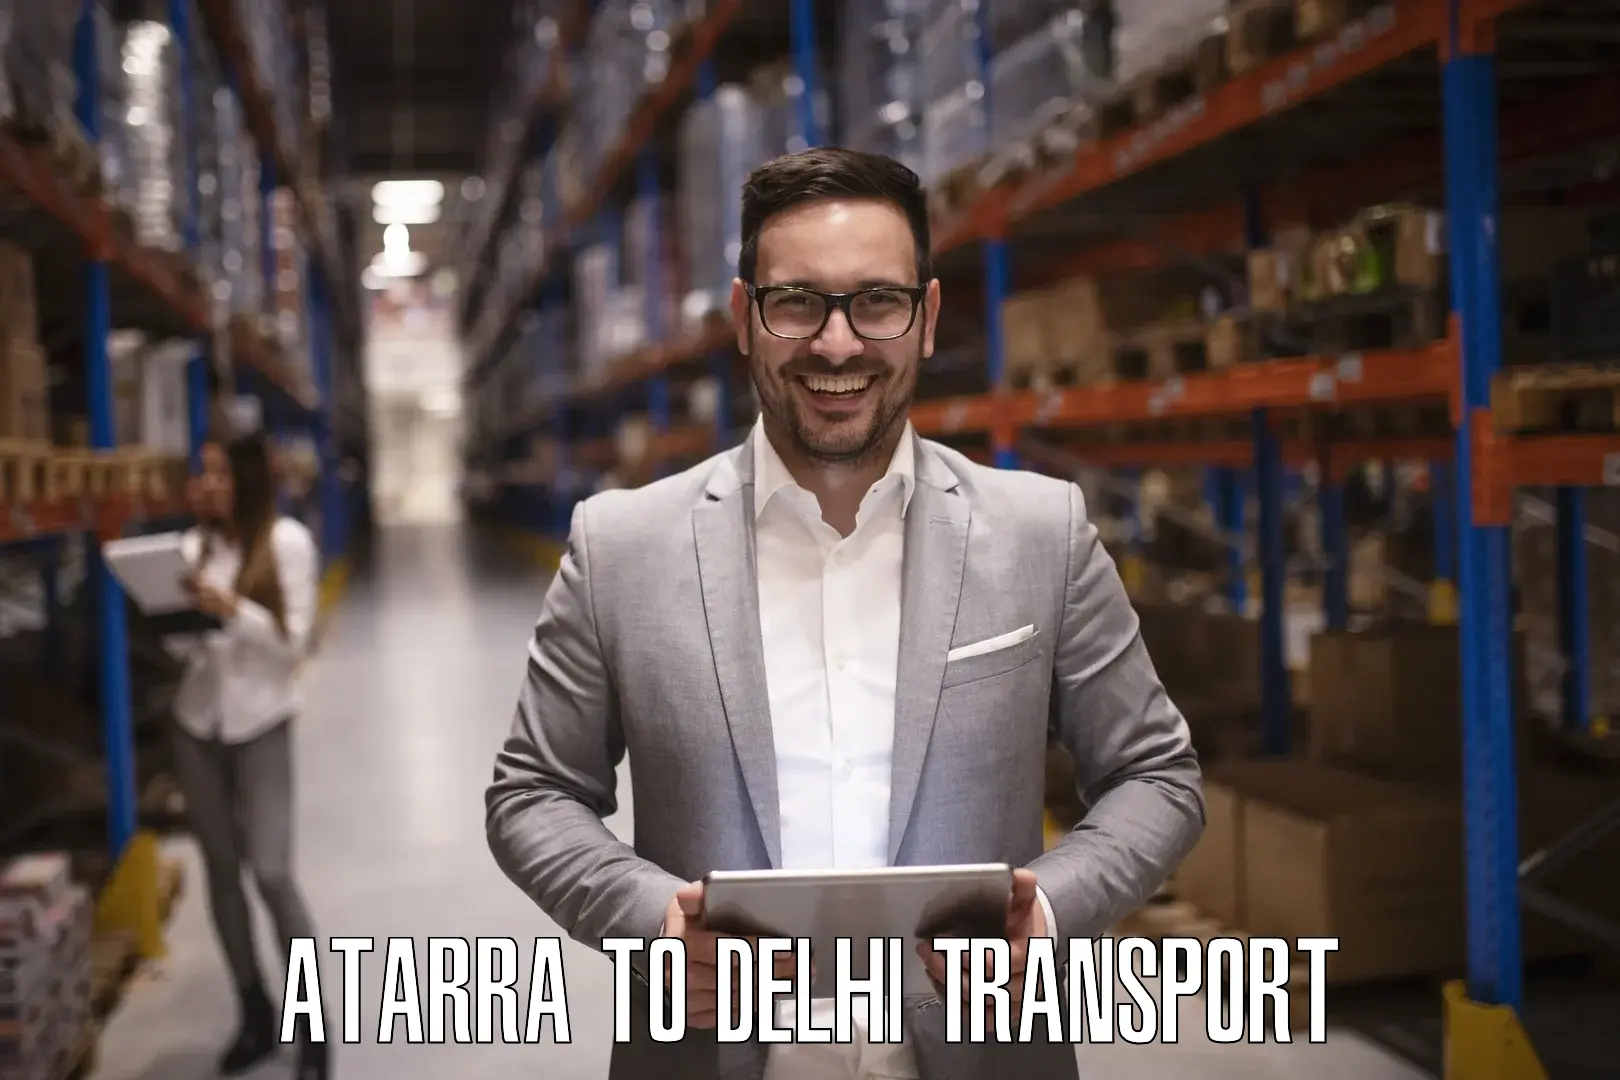 Online transport booking Atarra to Lodhi Road